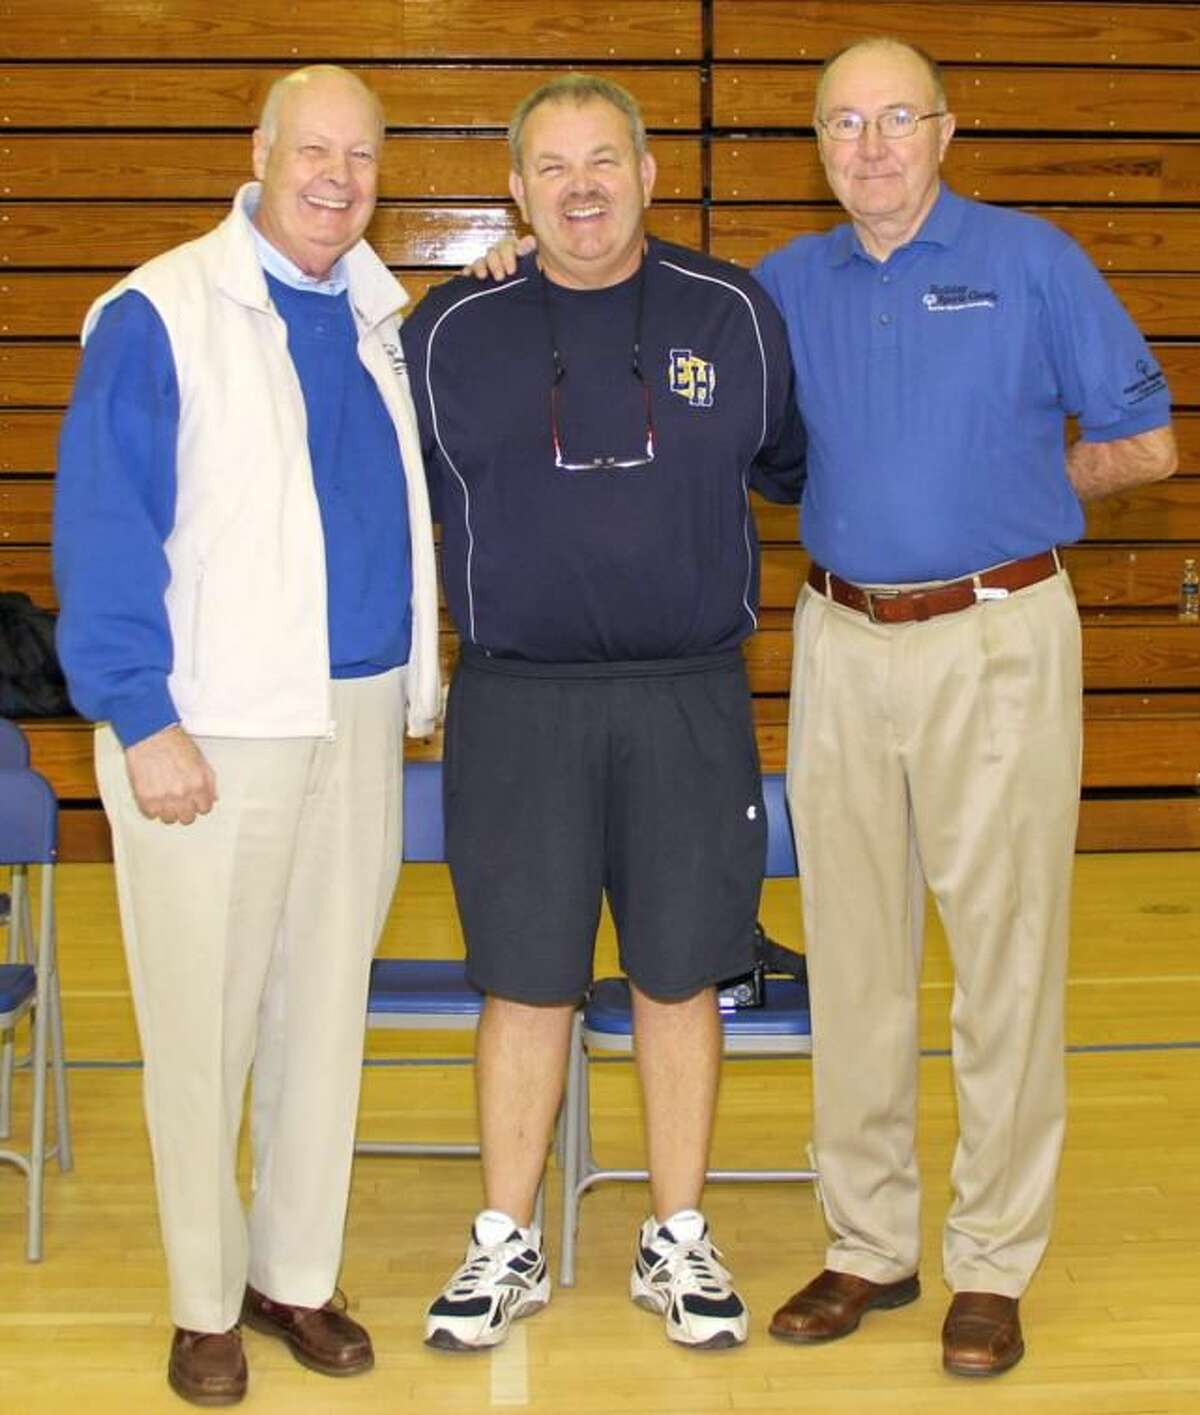 Submitted photo Pictured, from left to right, are Bill McNamara, representing IBM, Jim Reynolds, the director of the tournament, and Jack McDonald, the Athletic Director of Quinnipiac University.